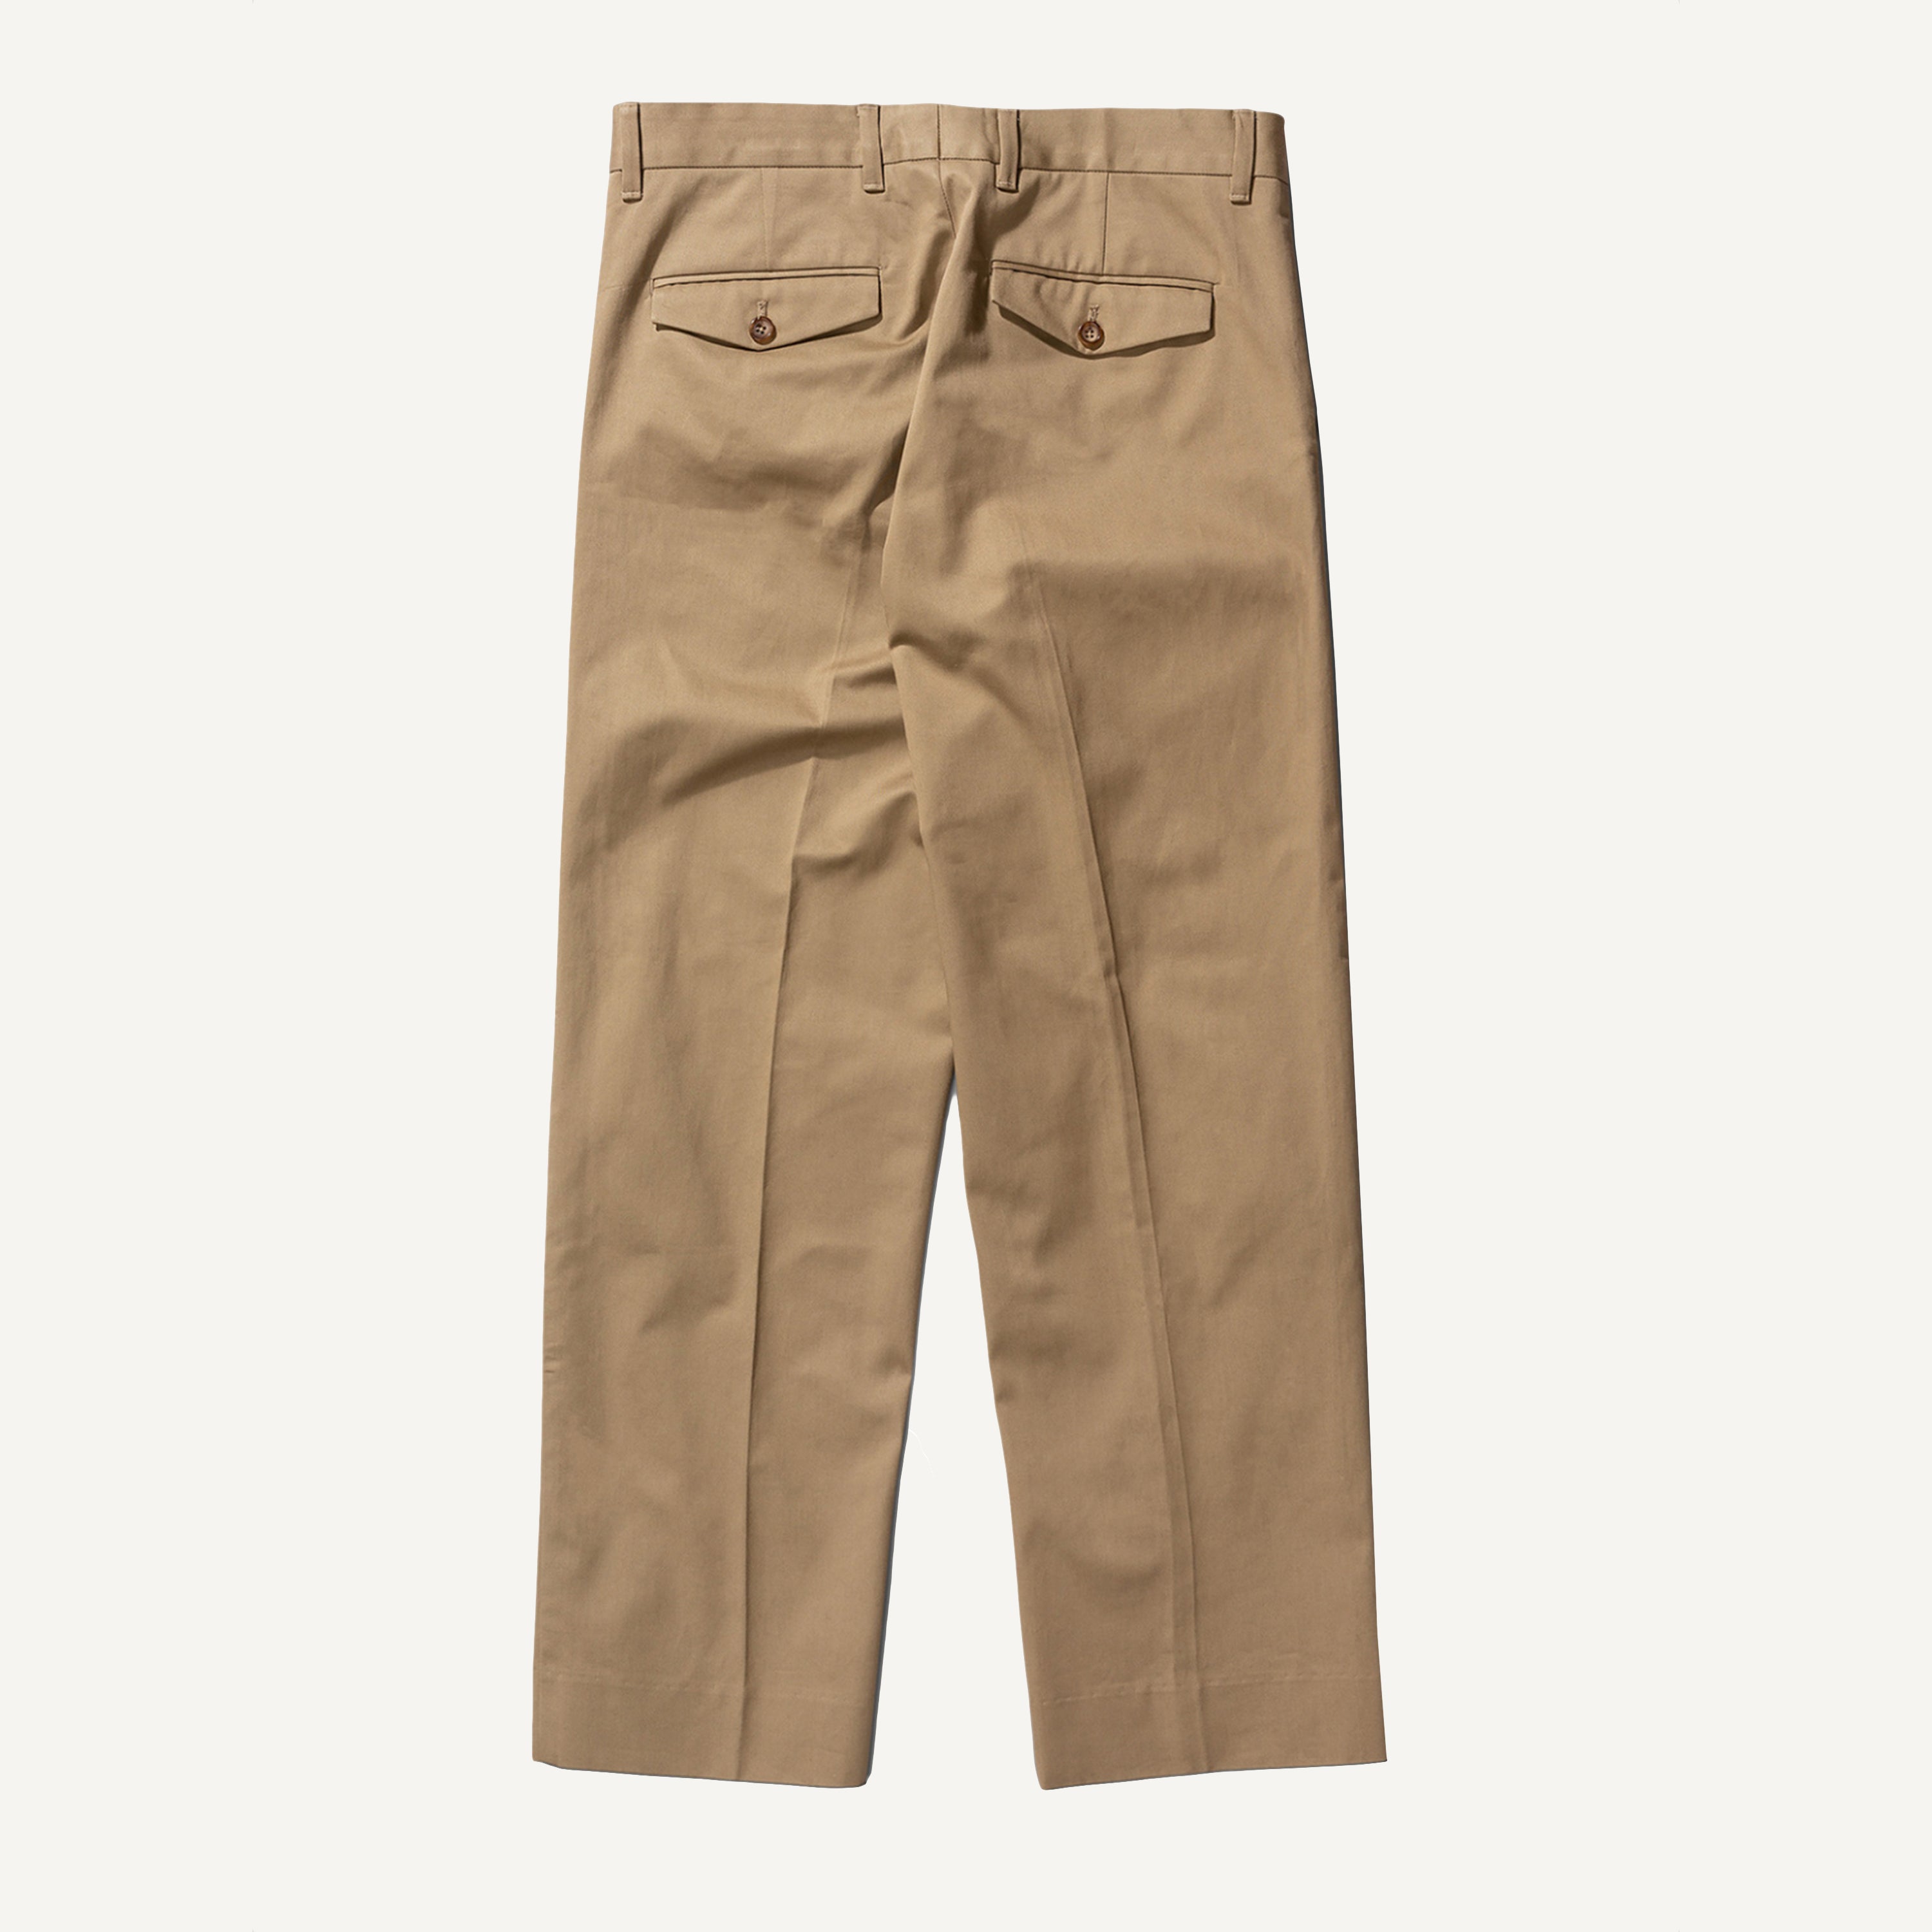 NORSE RELAXED FIT CHINOS